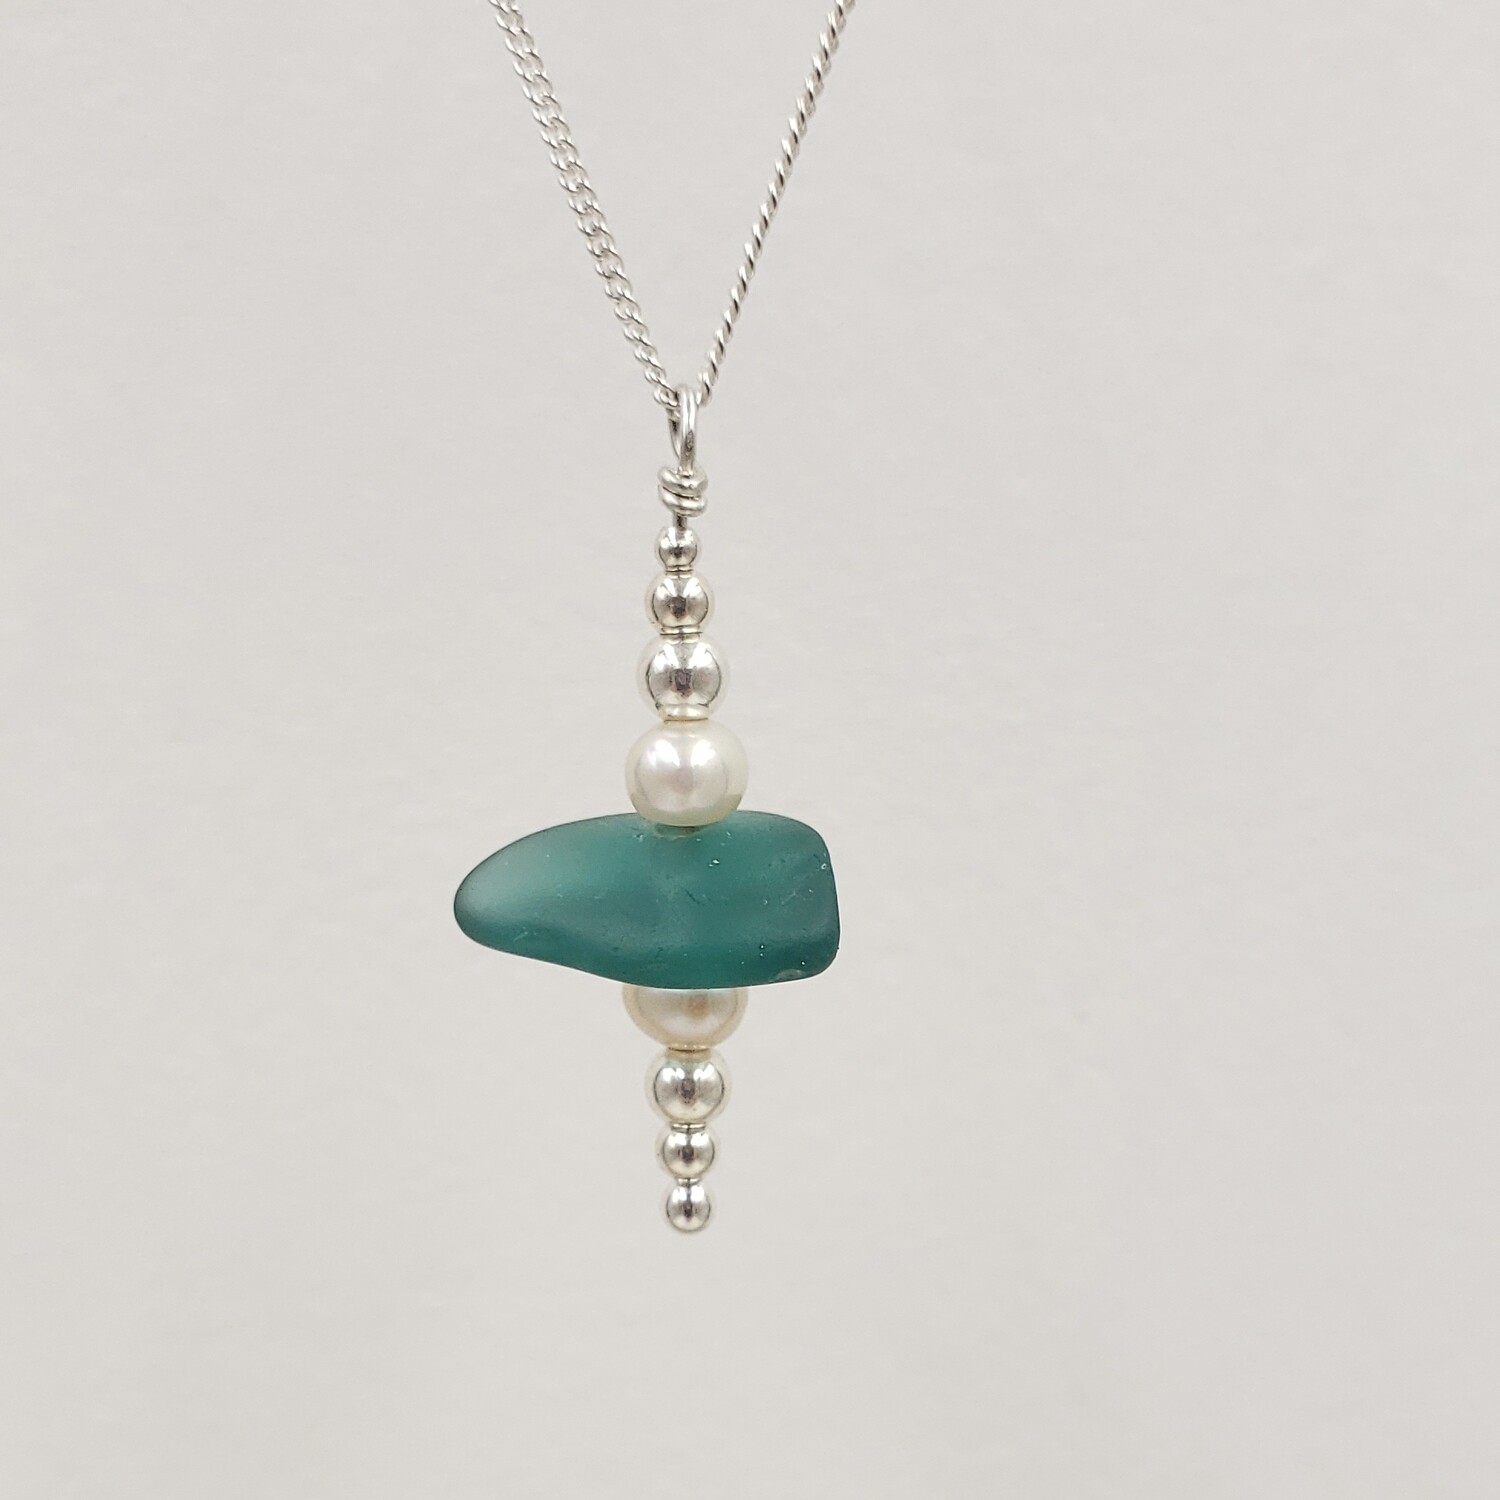 Teal Lake Erie Beach Glass Stacking Necklace with Freshwater Pearls